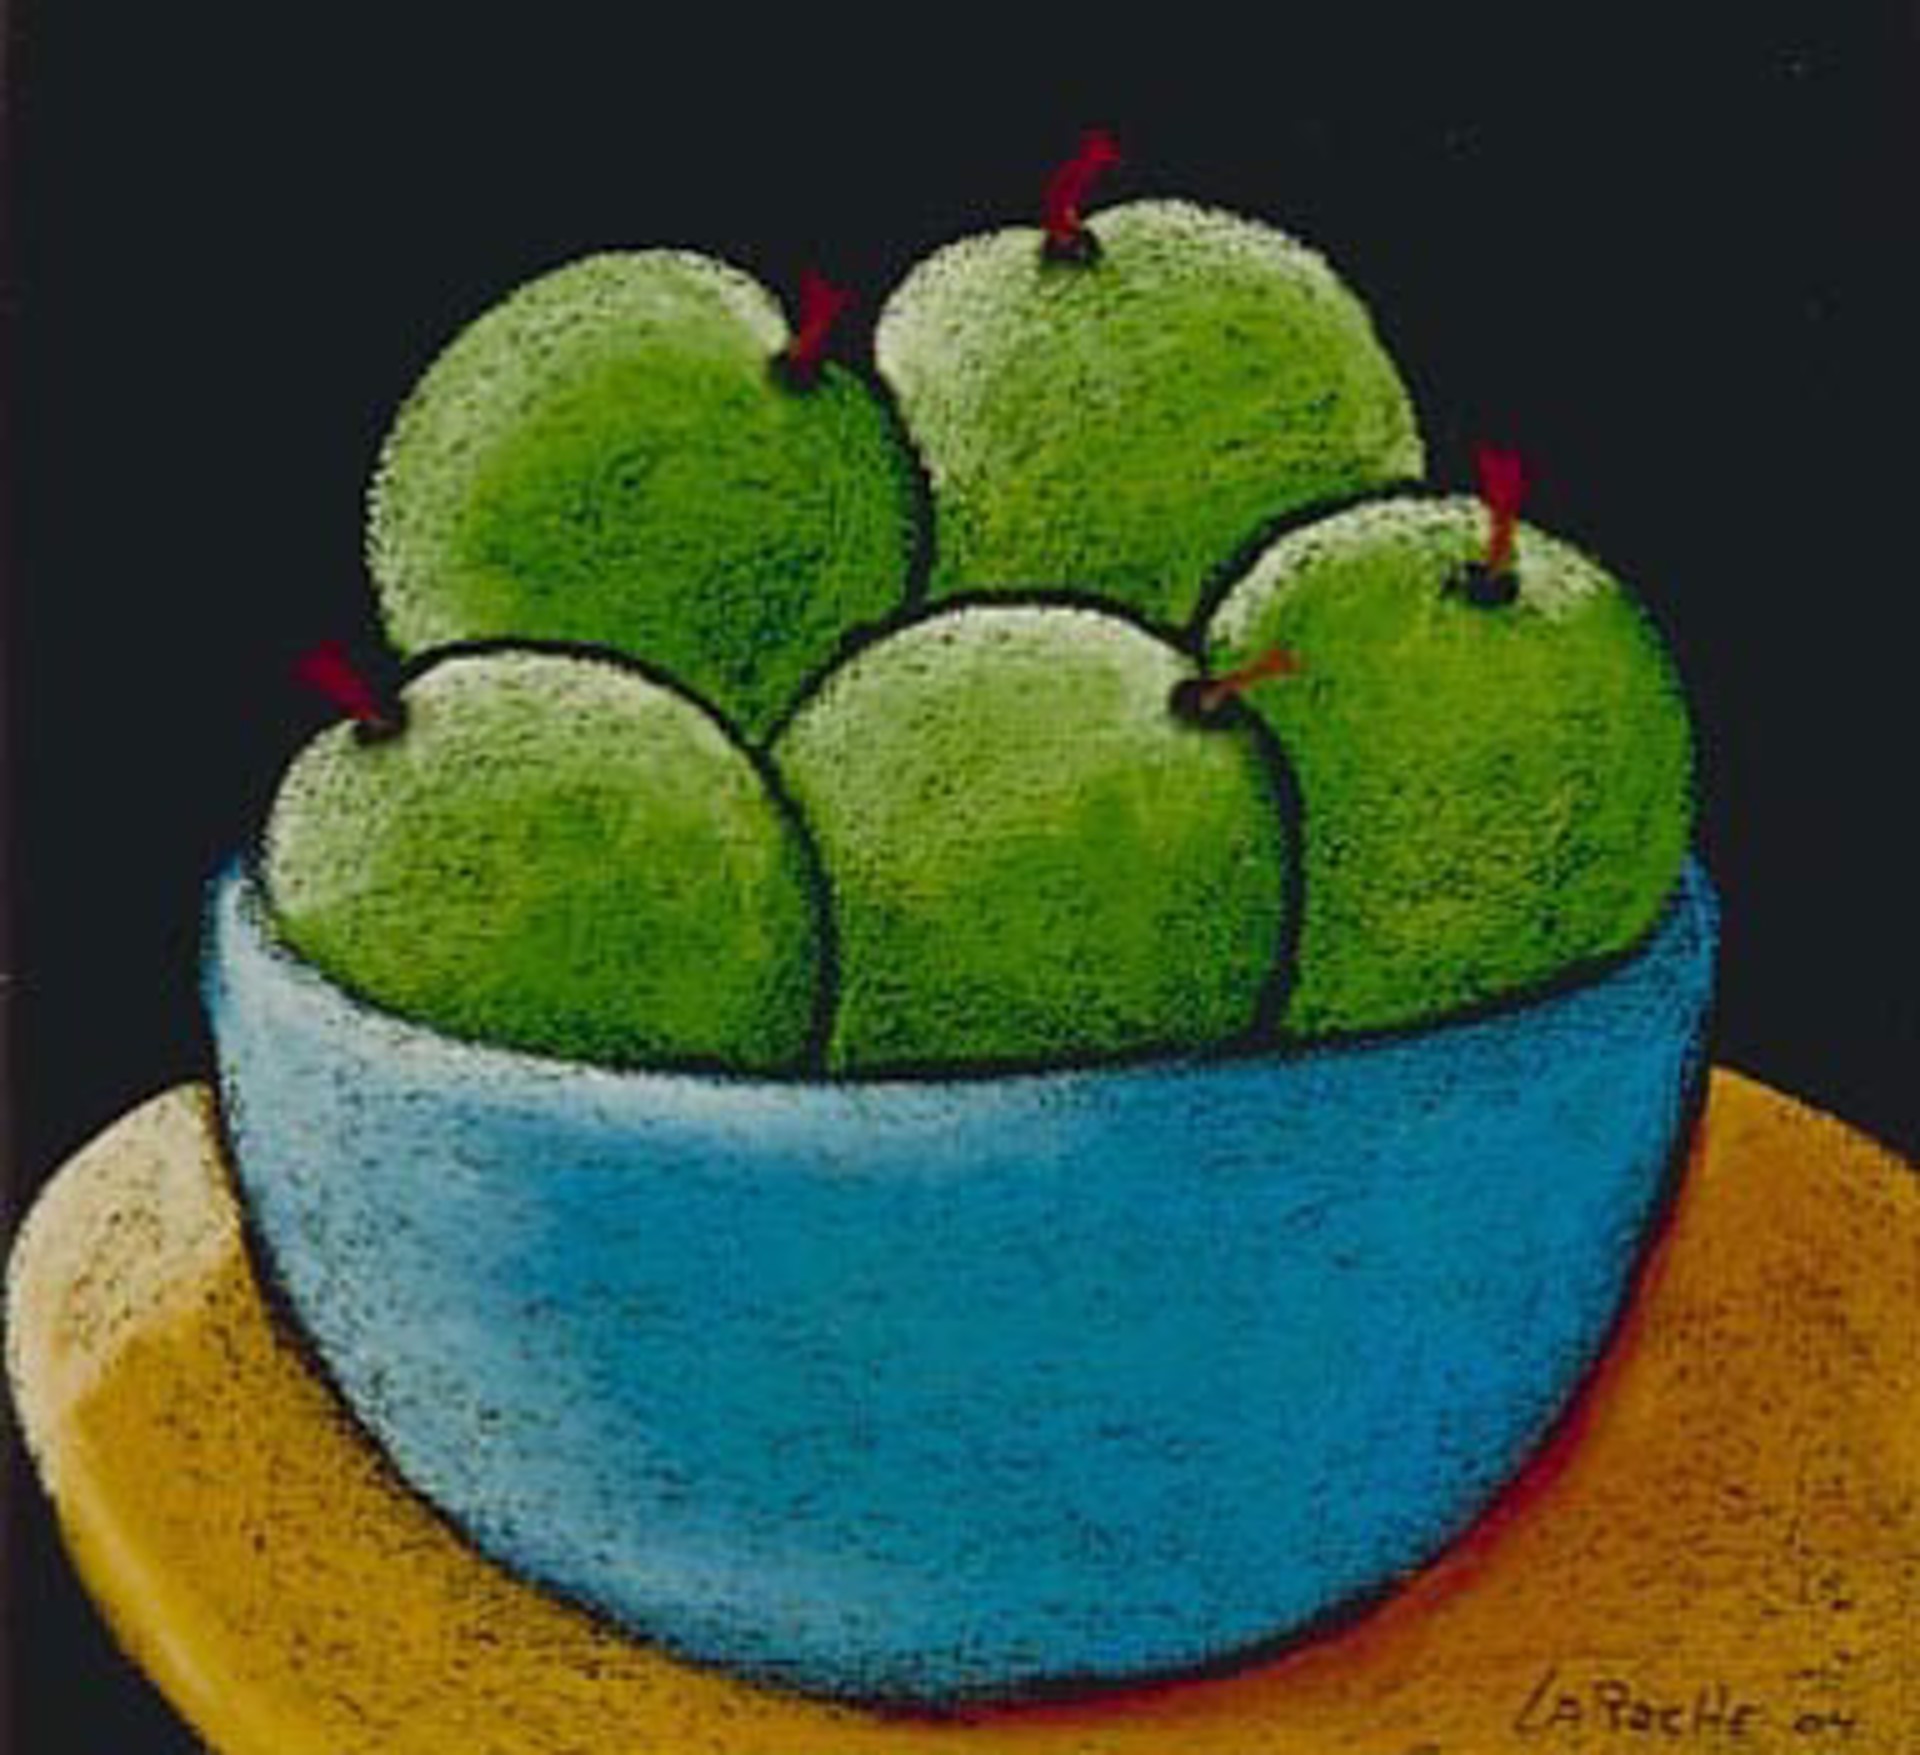 Granny Smiths - SOLD available for commission by Carole LaRoche